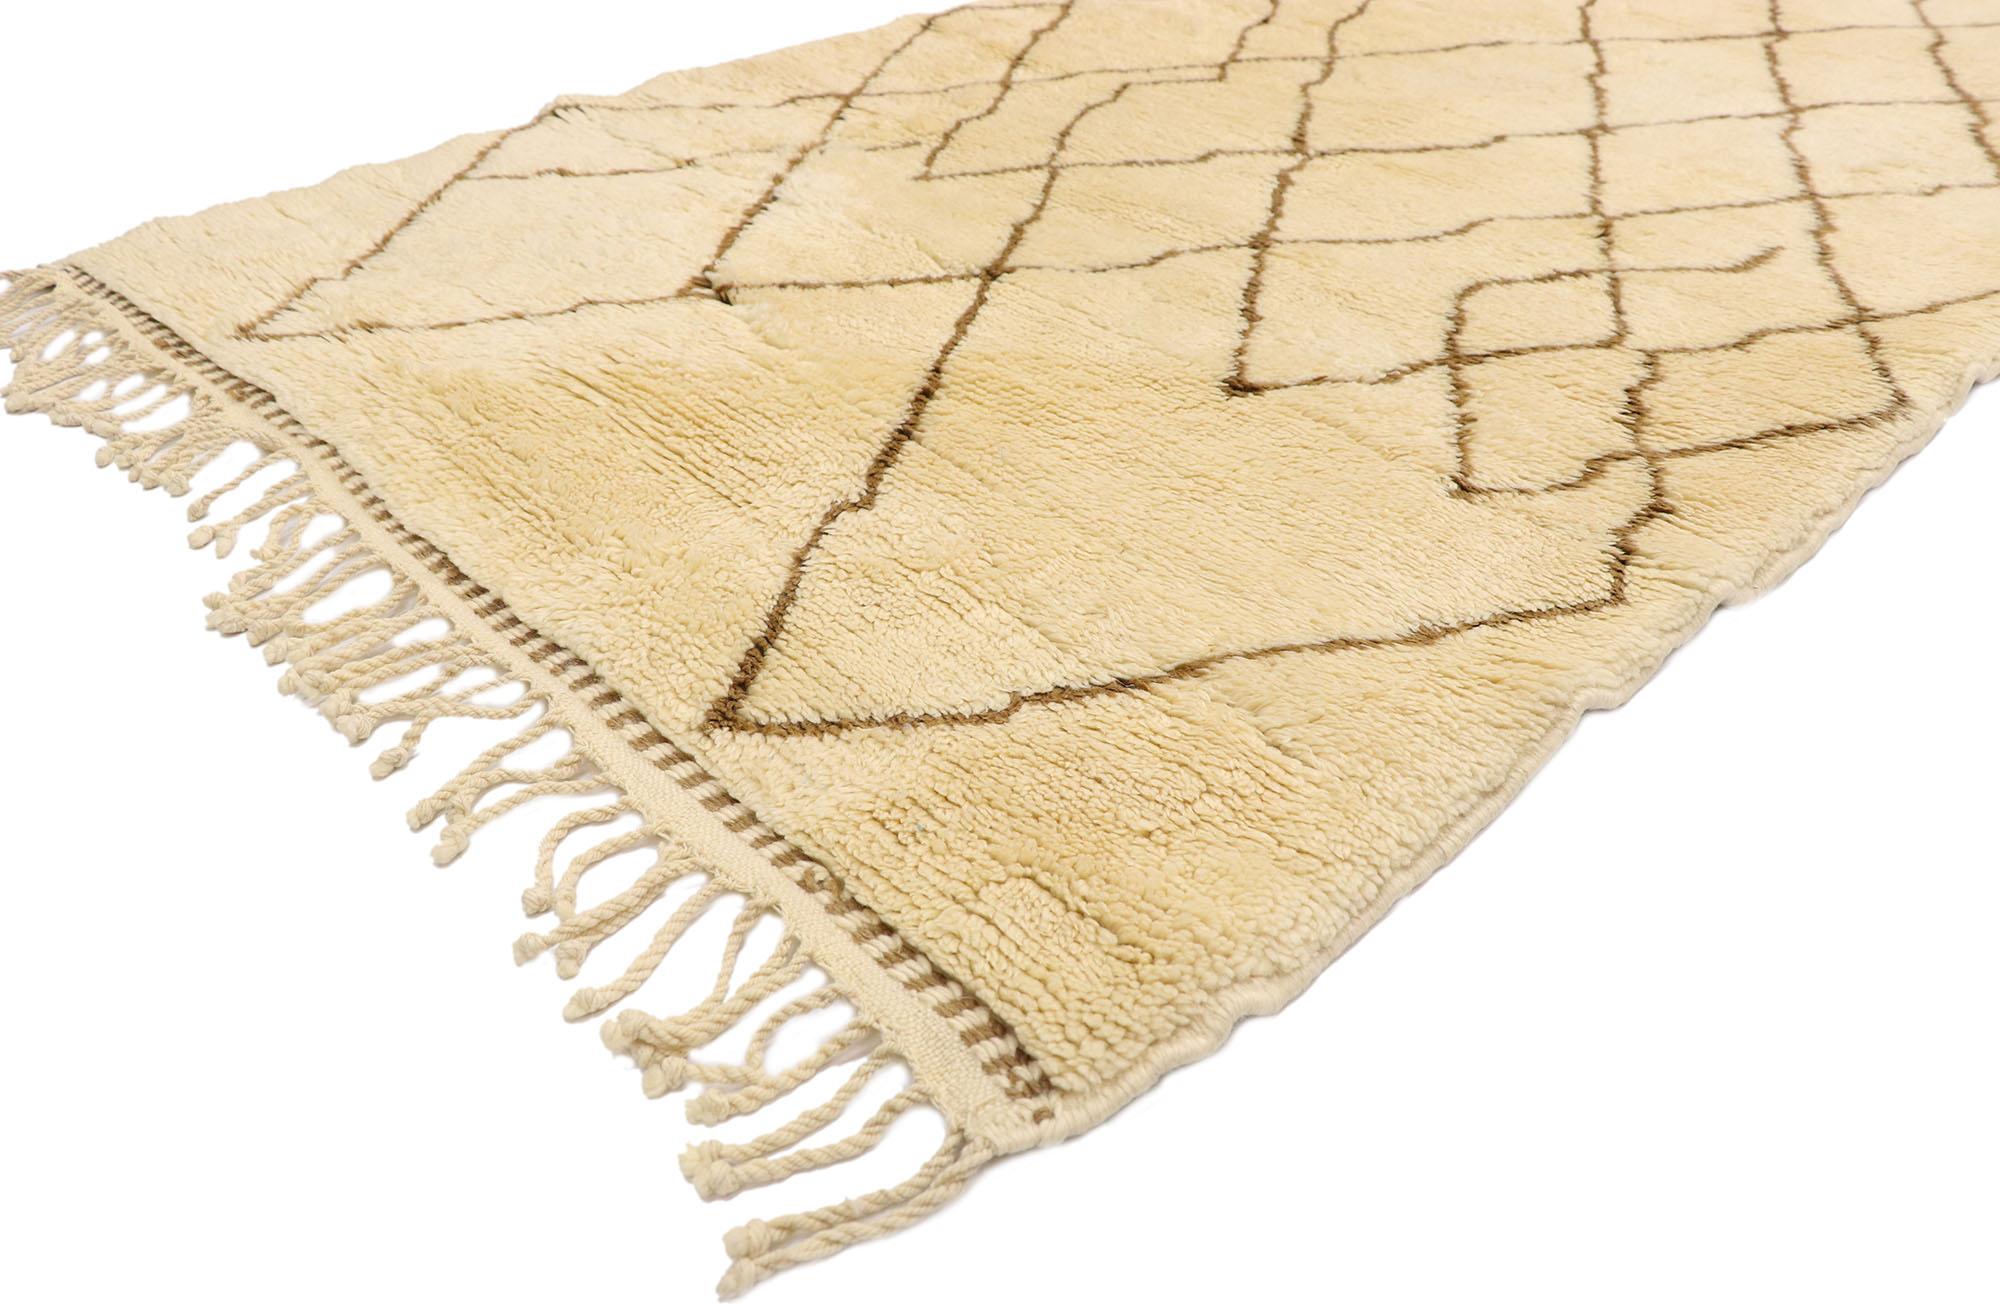 20736 Extra Long Berber Moroccan Shag Hallway Runner with Modernist Style 04'00 x 19'04.  This hand knotted wool contemporary Berber Moroccan shag hallway runner features contrasting brown lines running the length of the creamy-beige backdrop. The